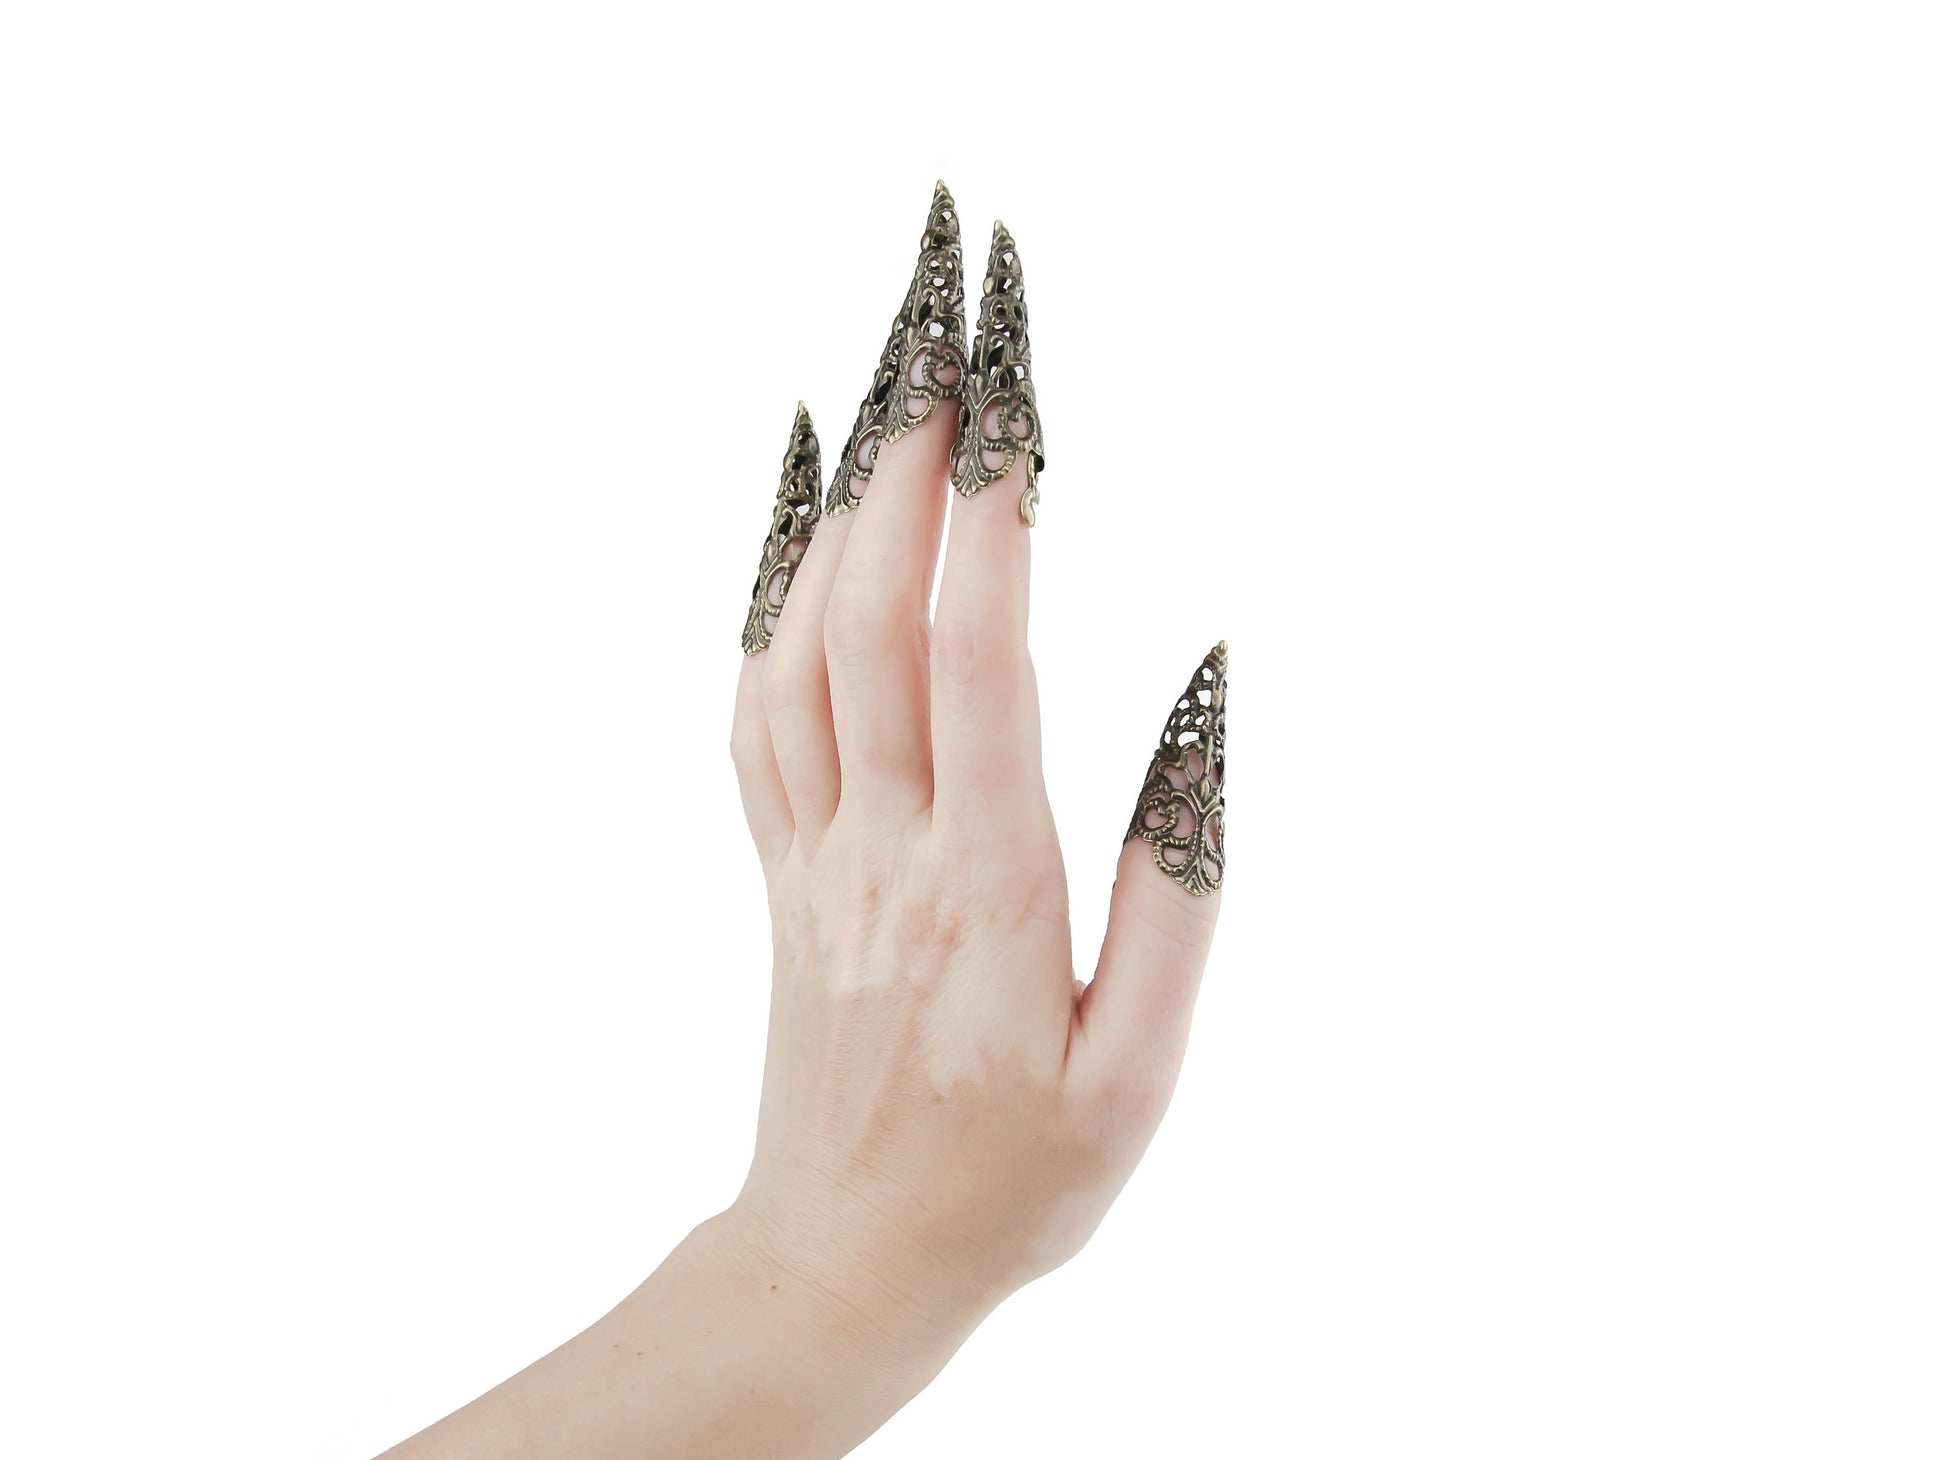 Elegant long bronze finger claws jewelry by Myril Jewels, showcasing a neo-gothic design perfect for those with a dark, avant-garde fashion sense. Ideal for Halloween, they're a goth-chic accessory for everyday wear, festivals, and rave parties. A bold gift for the goth girlfriend or a unique friend